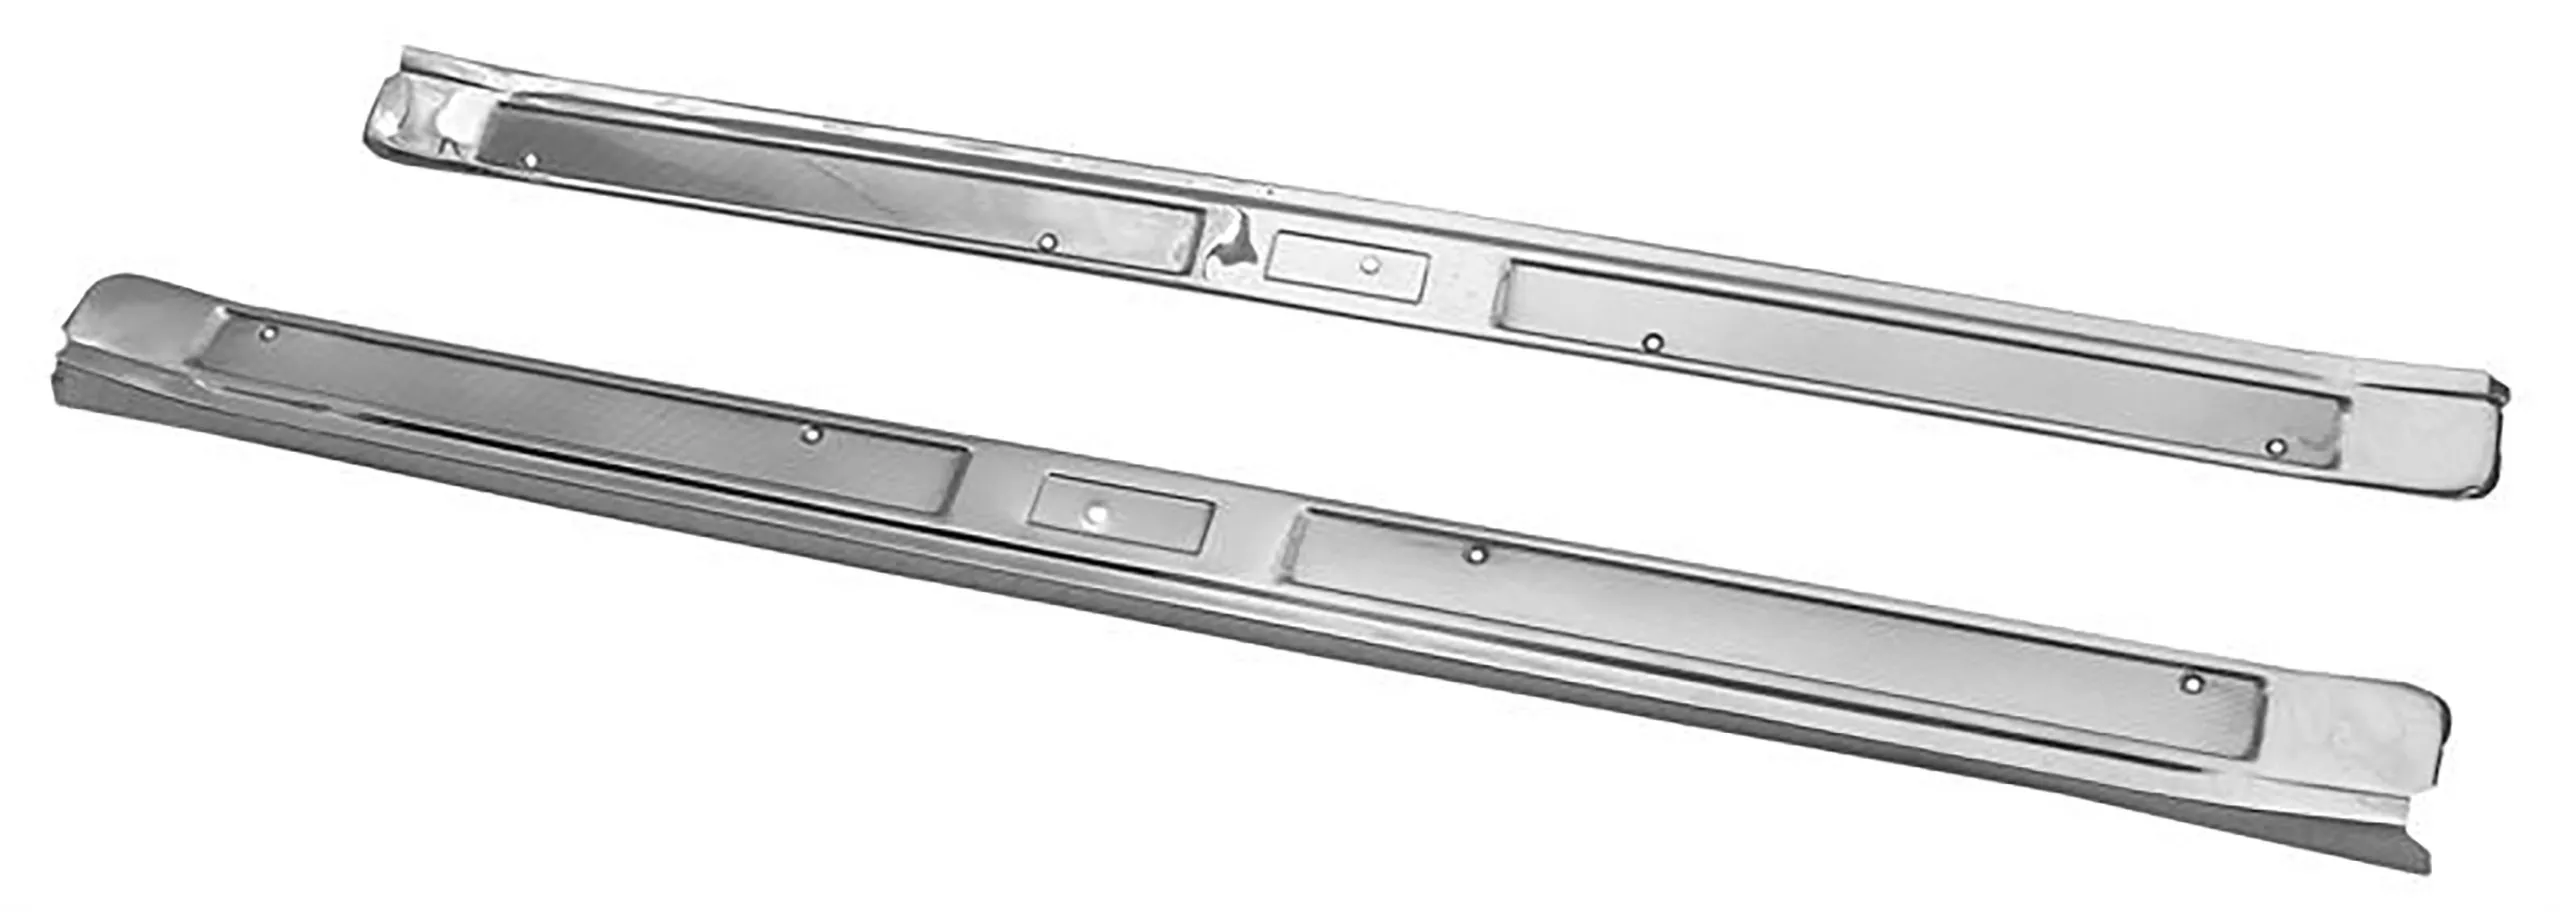 First Generation 1969-1970 Ford Mustang Stainless Steel Sill Plates - Dynacorn